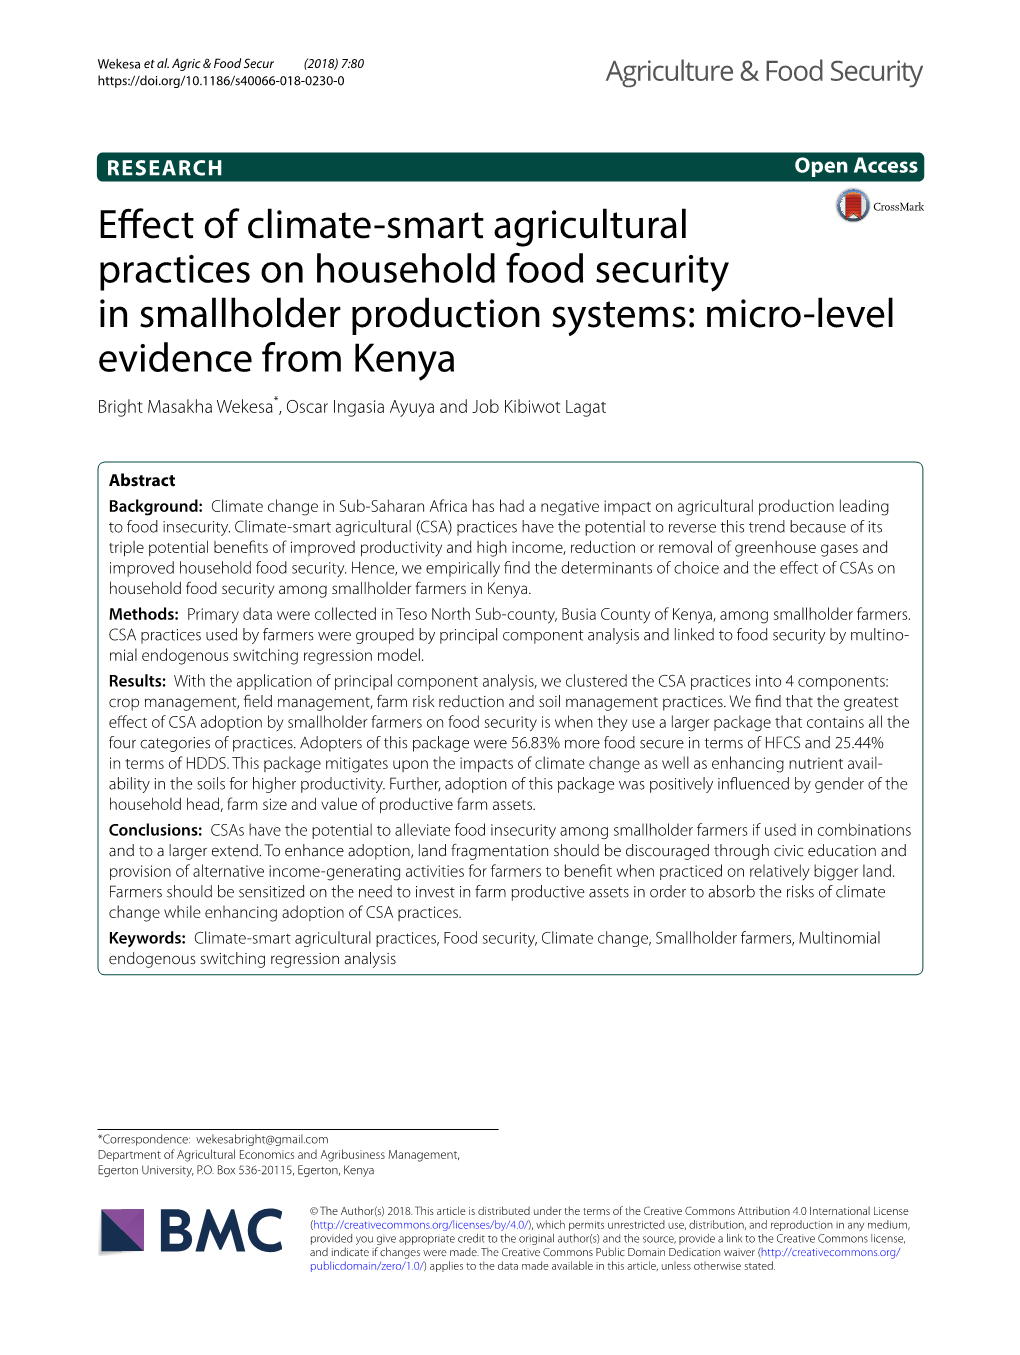 Effect of Climate-Smart Agricultural Practices on Household Food Security in Smallholder Production Systems: Micro-Level Evidenc